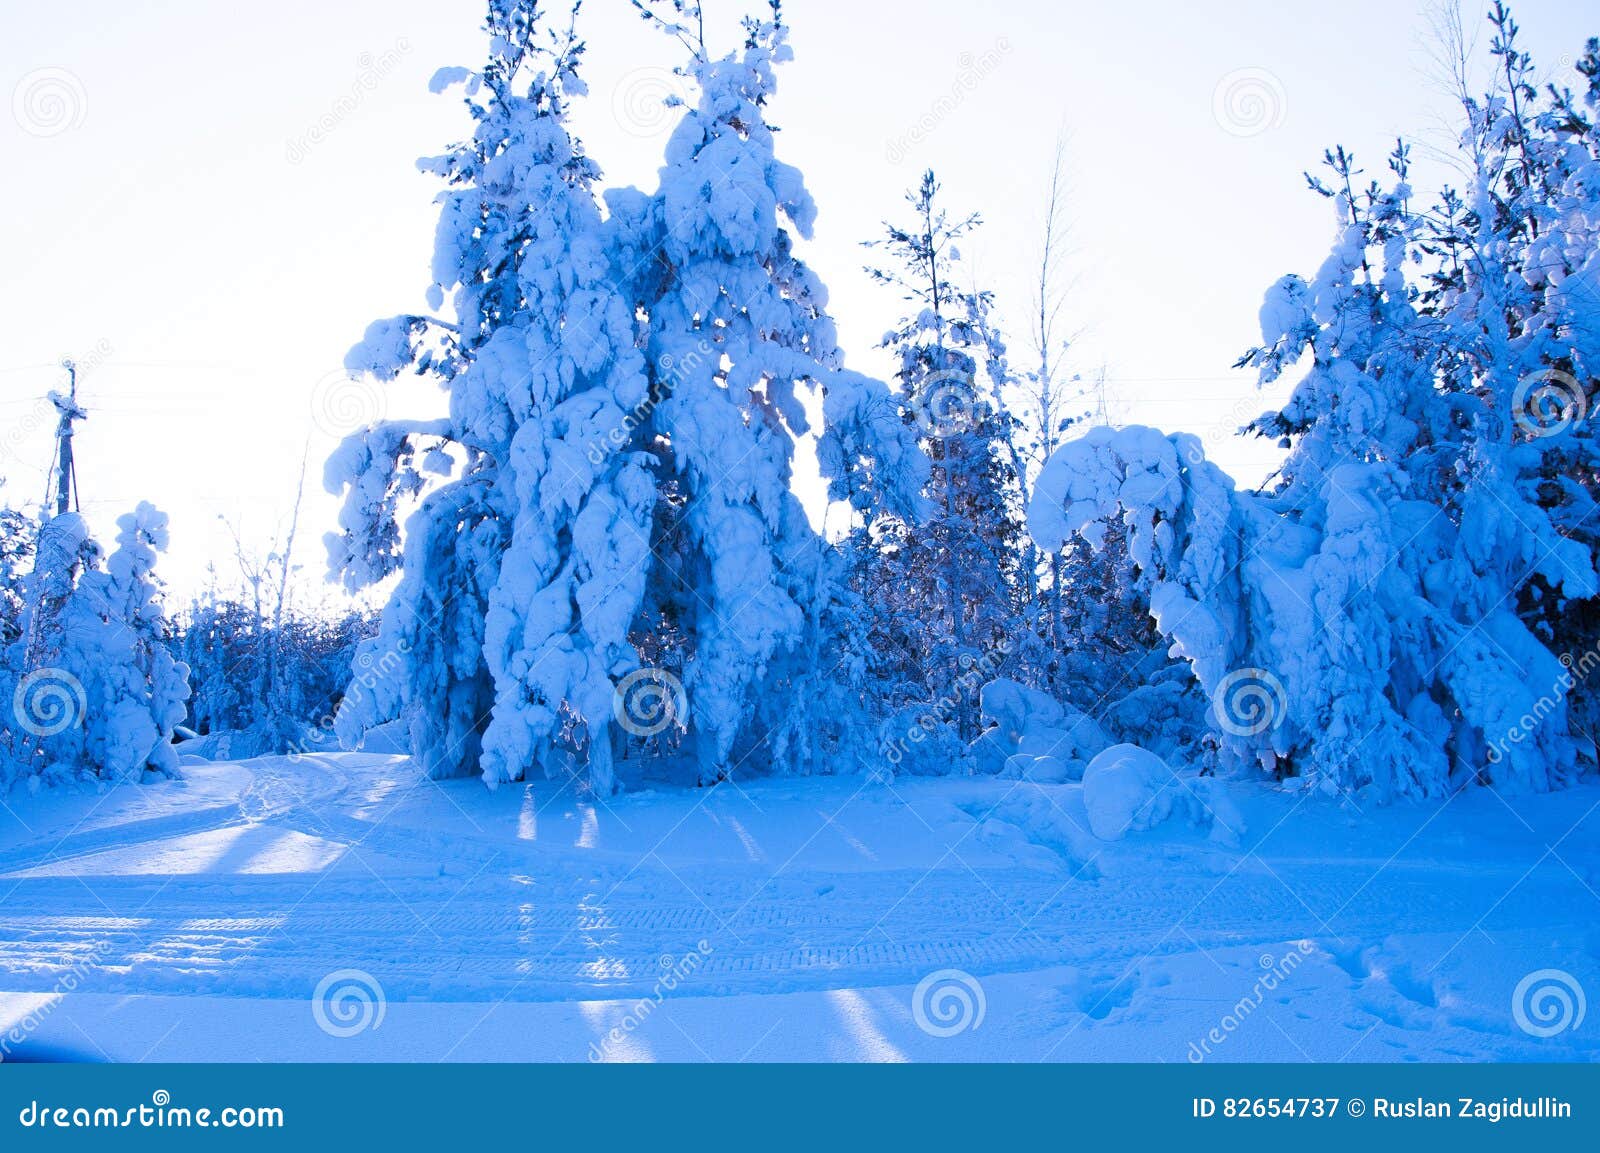 Beautiful Snowy Winter In Russia Stock Image Image Of Frost Park 82654737